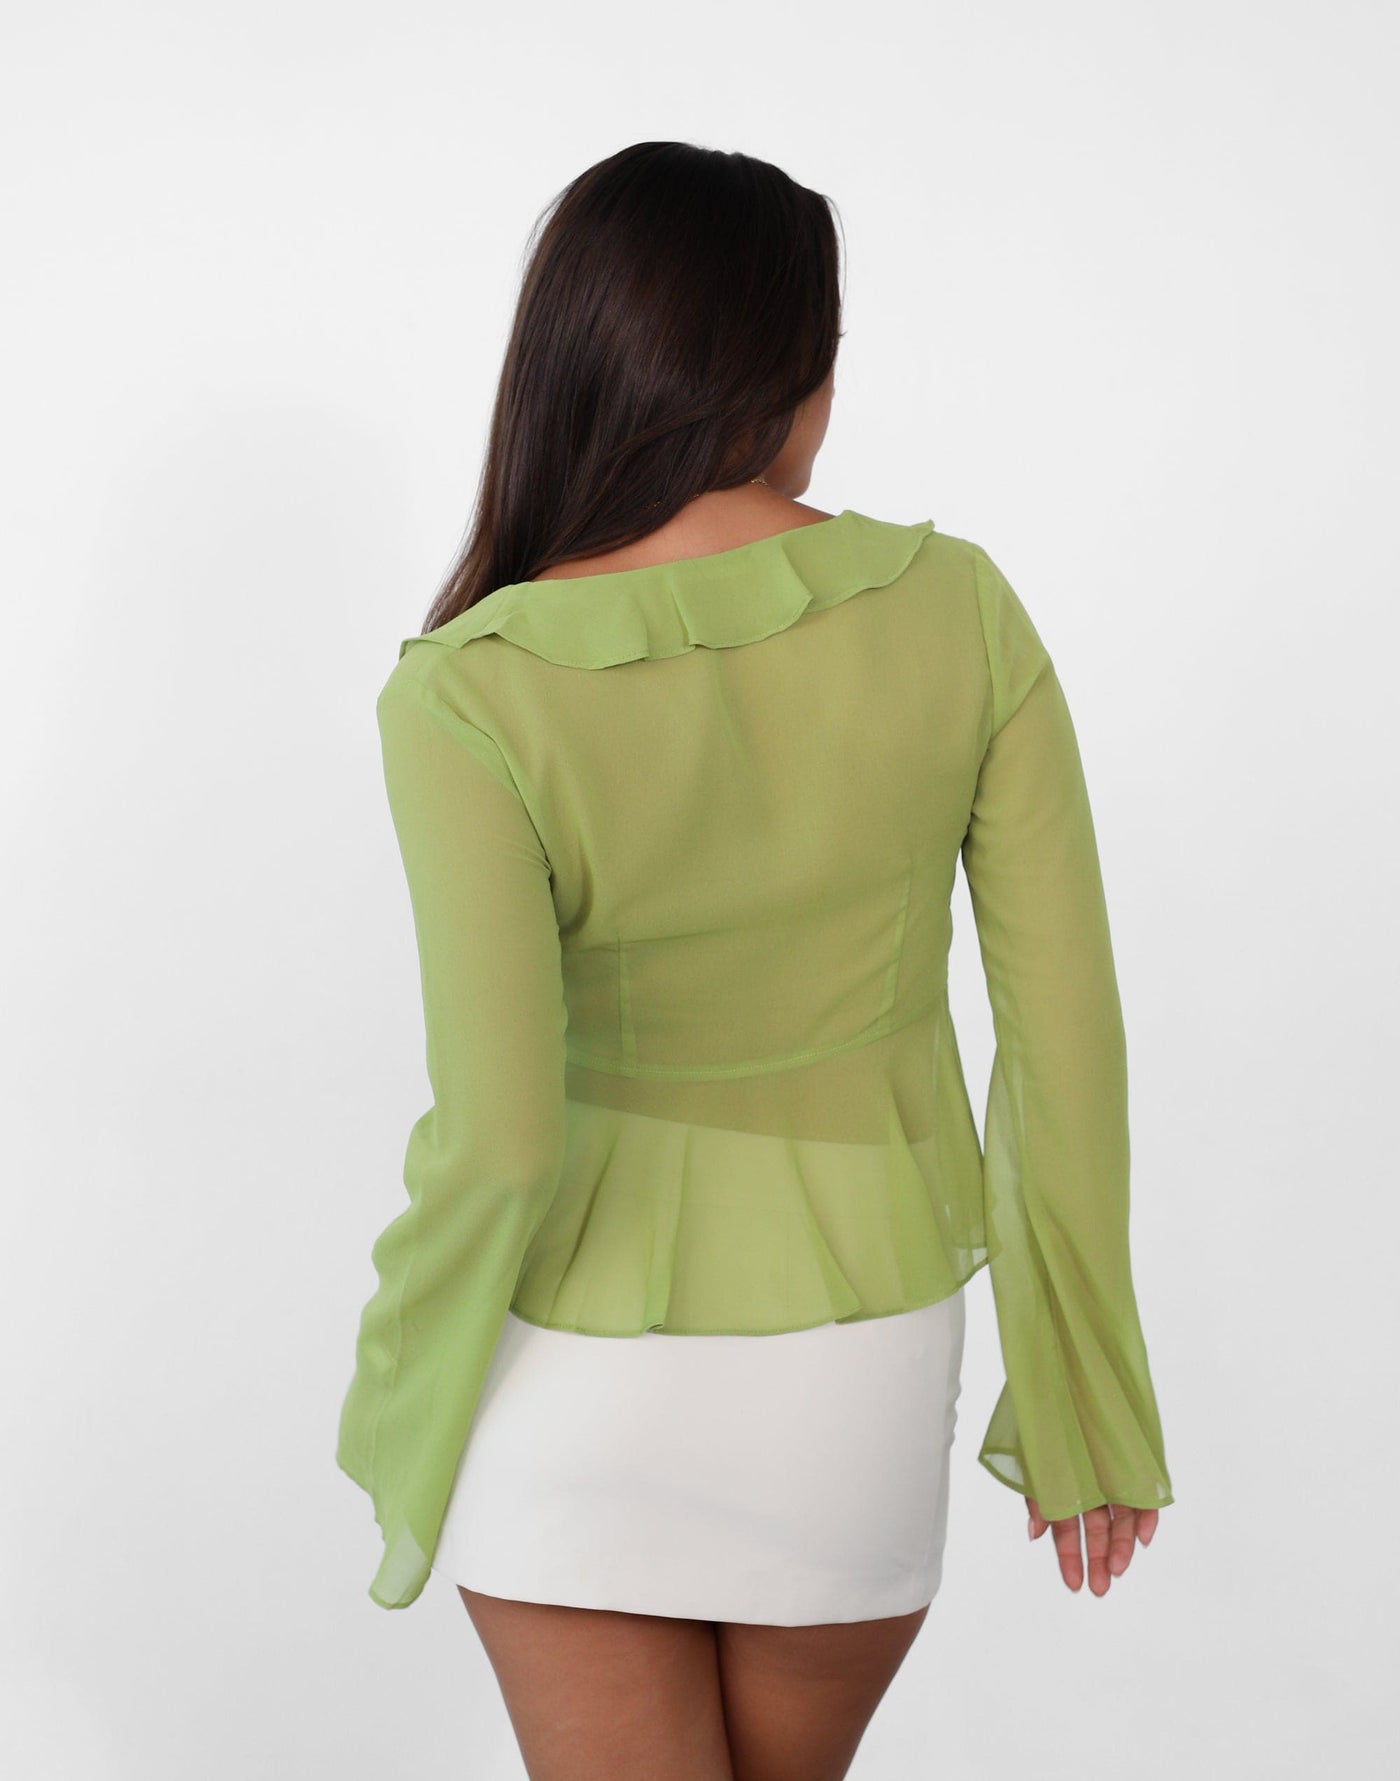 Leah Long Sleeve Top (Lime) - Sheer Tie Front Frill Detail Top - Women's Top - Charcoal Clothing